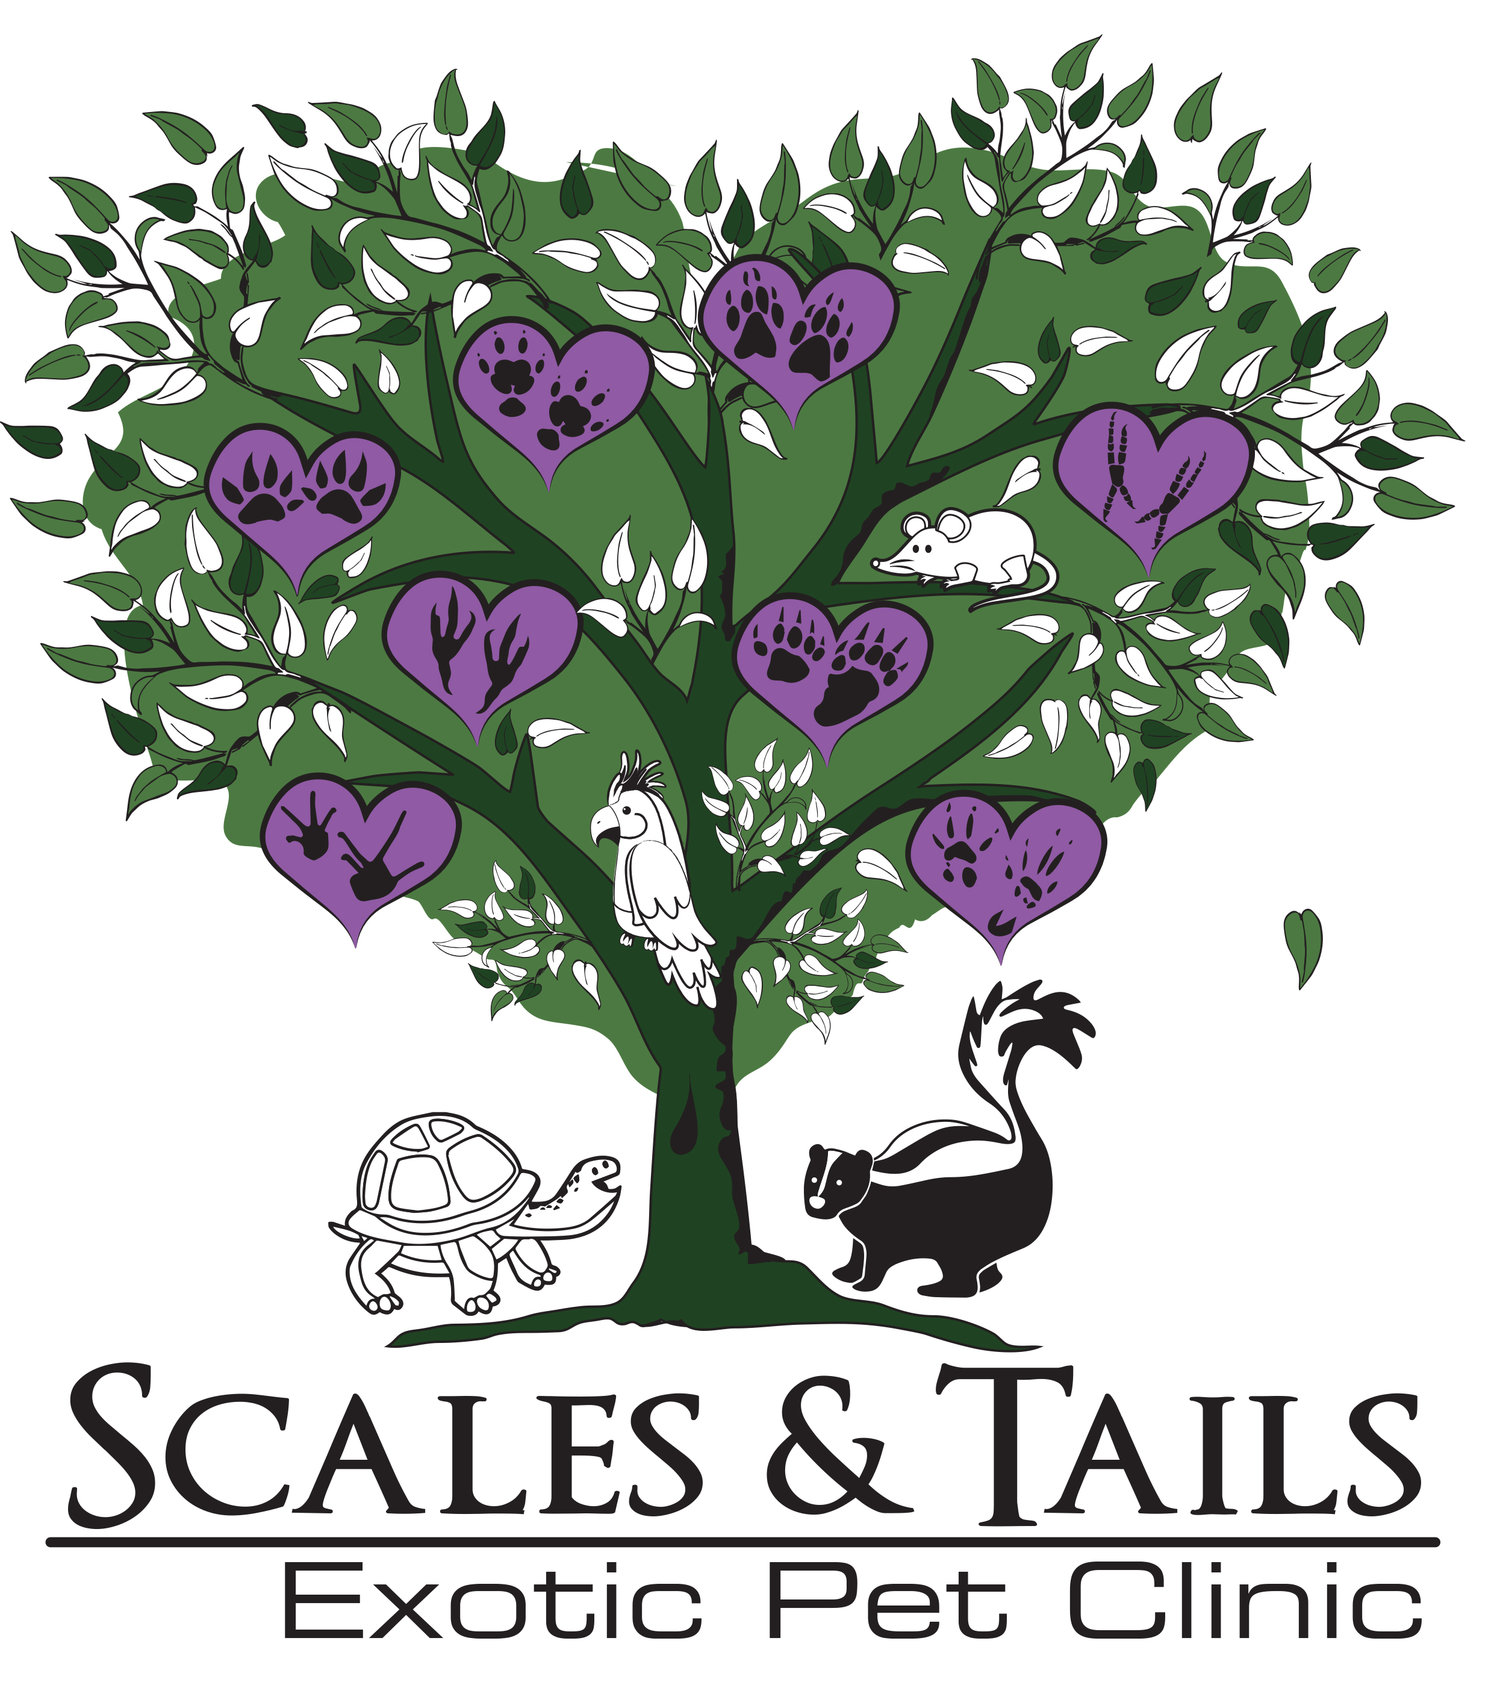 Scales & Tails Exotic Pet Clinic